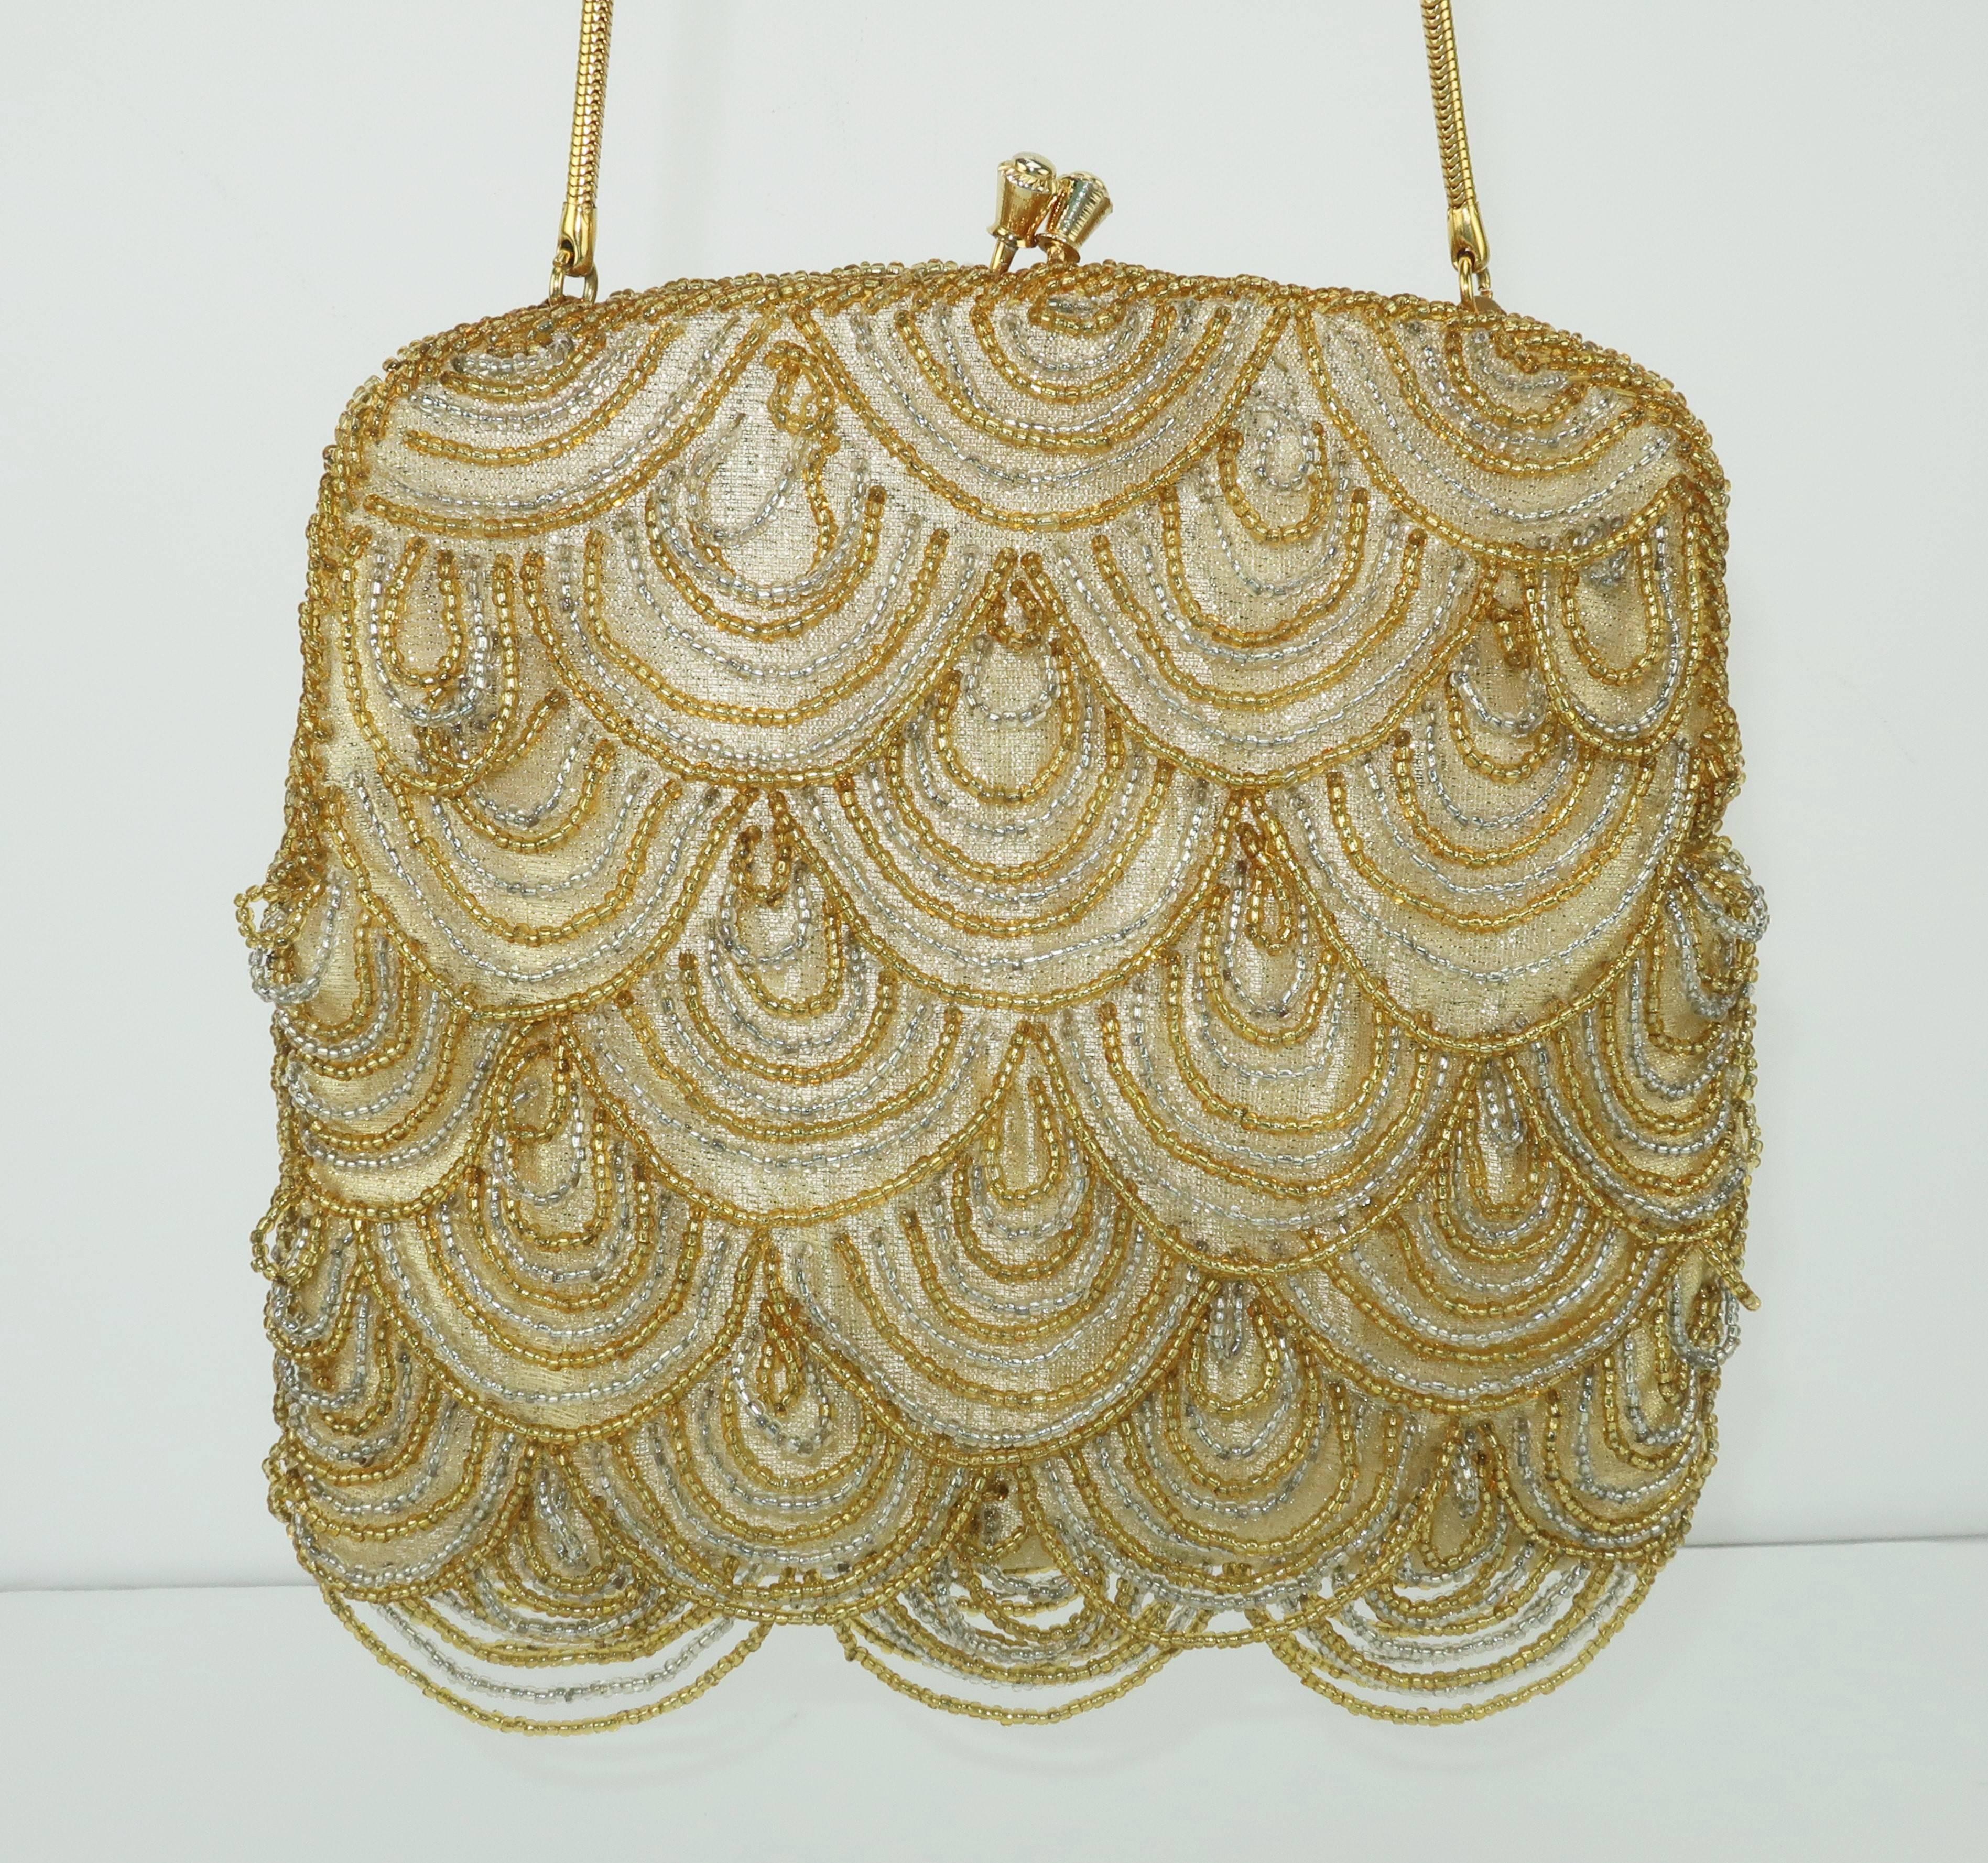 Hilde Walborg founded her company in the 1940's and was always in search of the best handmade beading for her designs.  This glamorous evening handbag combines an art deco aesthetic with a 1960’s vibe.  The gold tone metal frame supports a drop-in